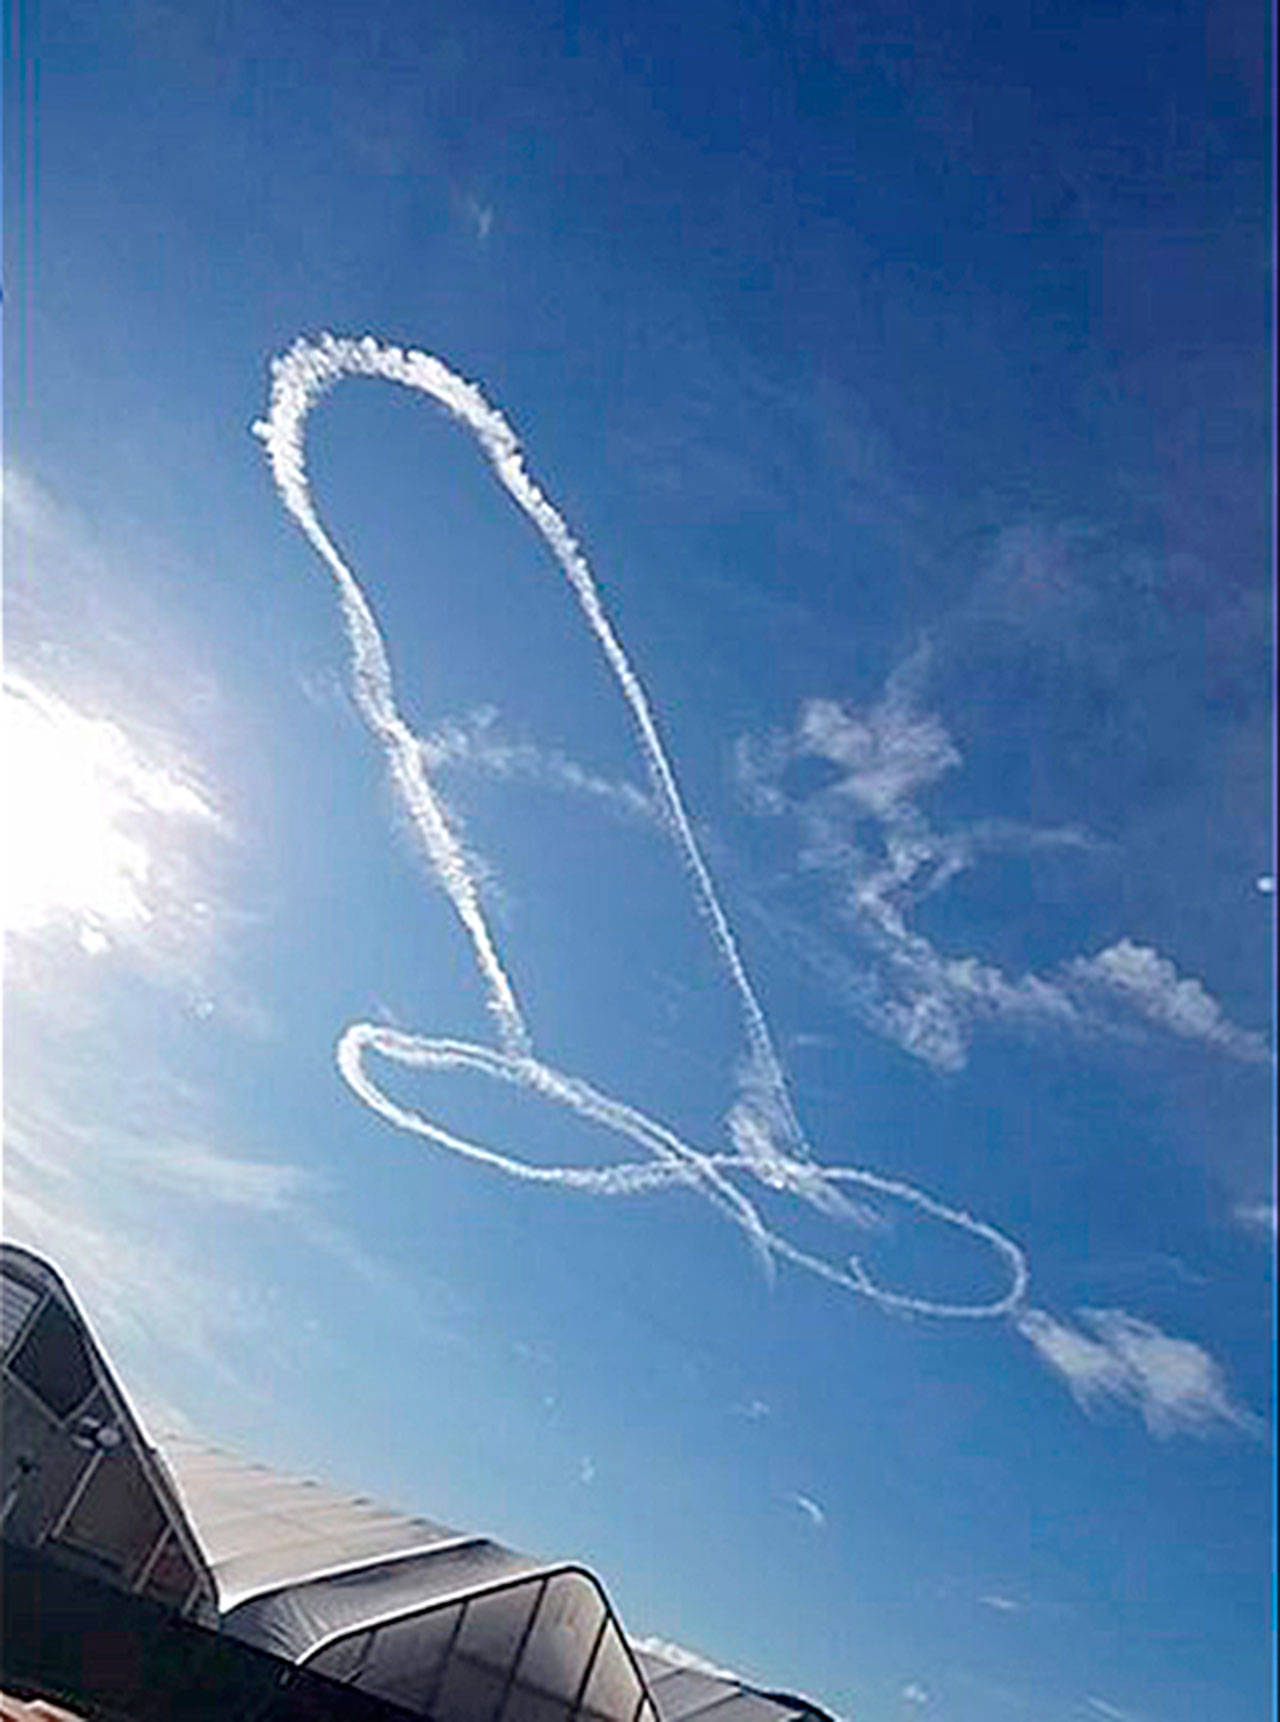 As published in the Spokesman Review — The navy pilots who caused a stir in Okanogan by drawing a phallic shape in the sky were recently disciplined.